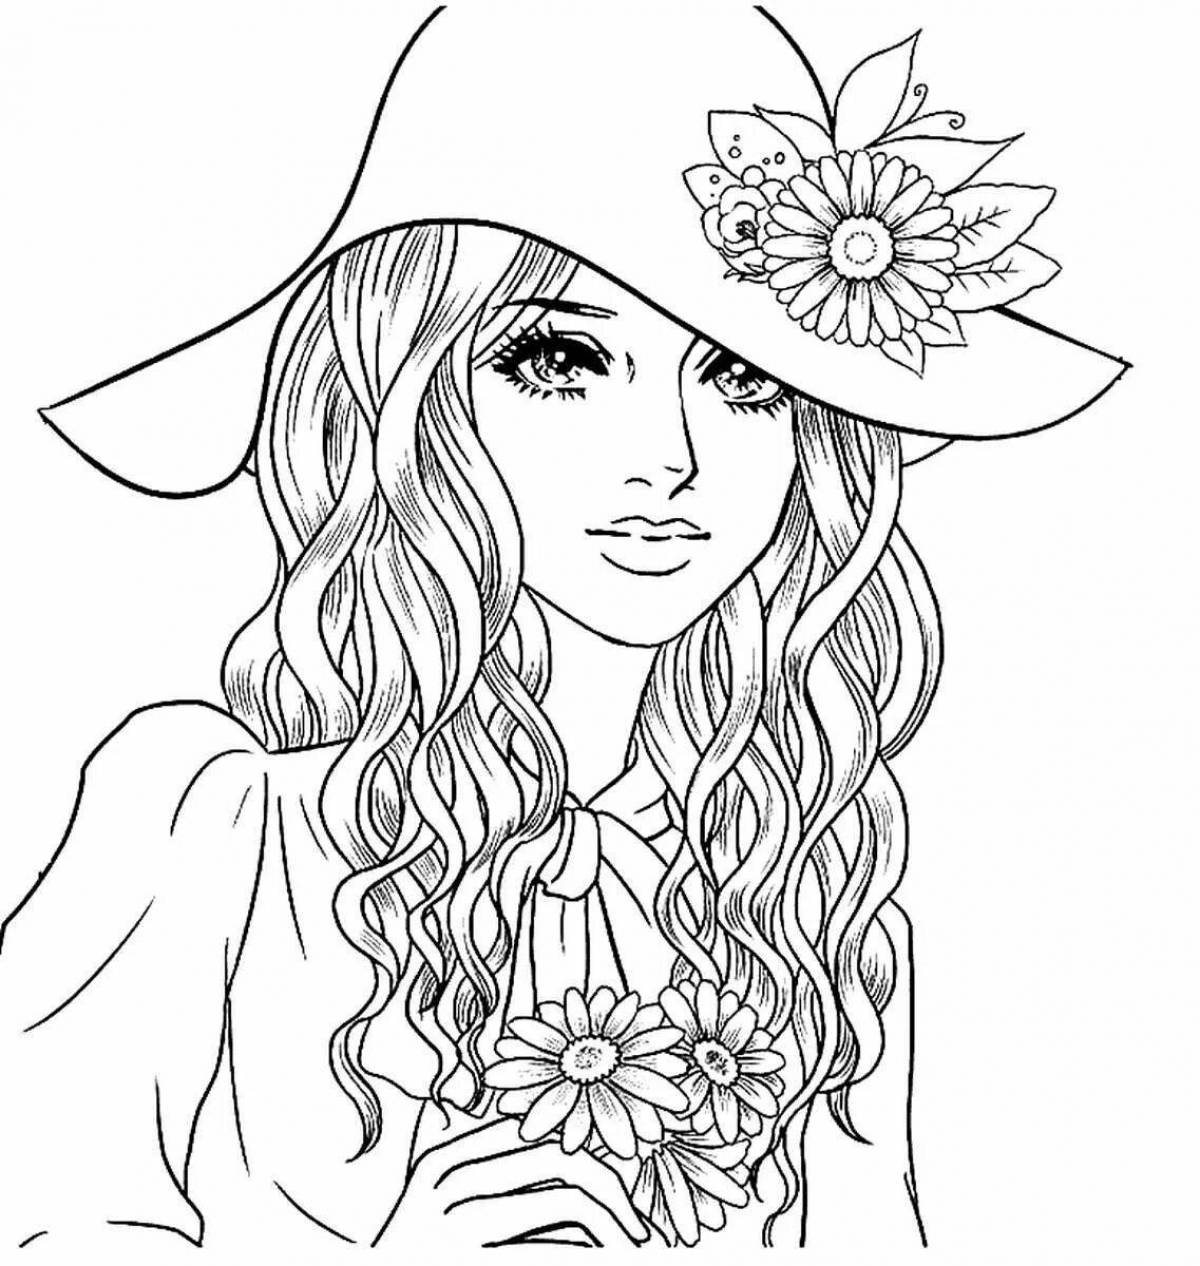 Cute coloring pages for girls 10-15 years old